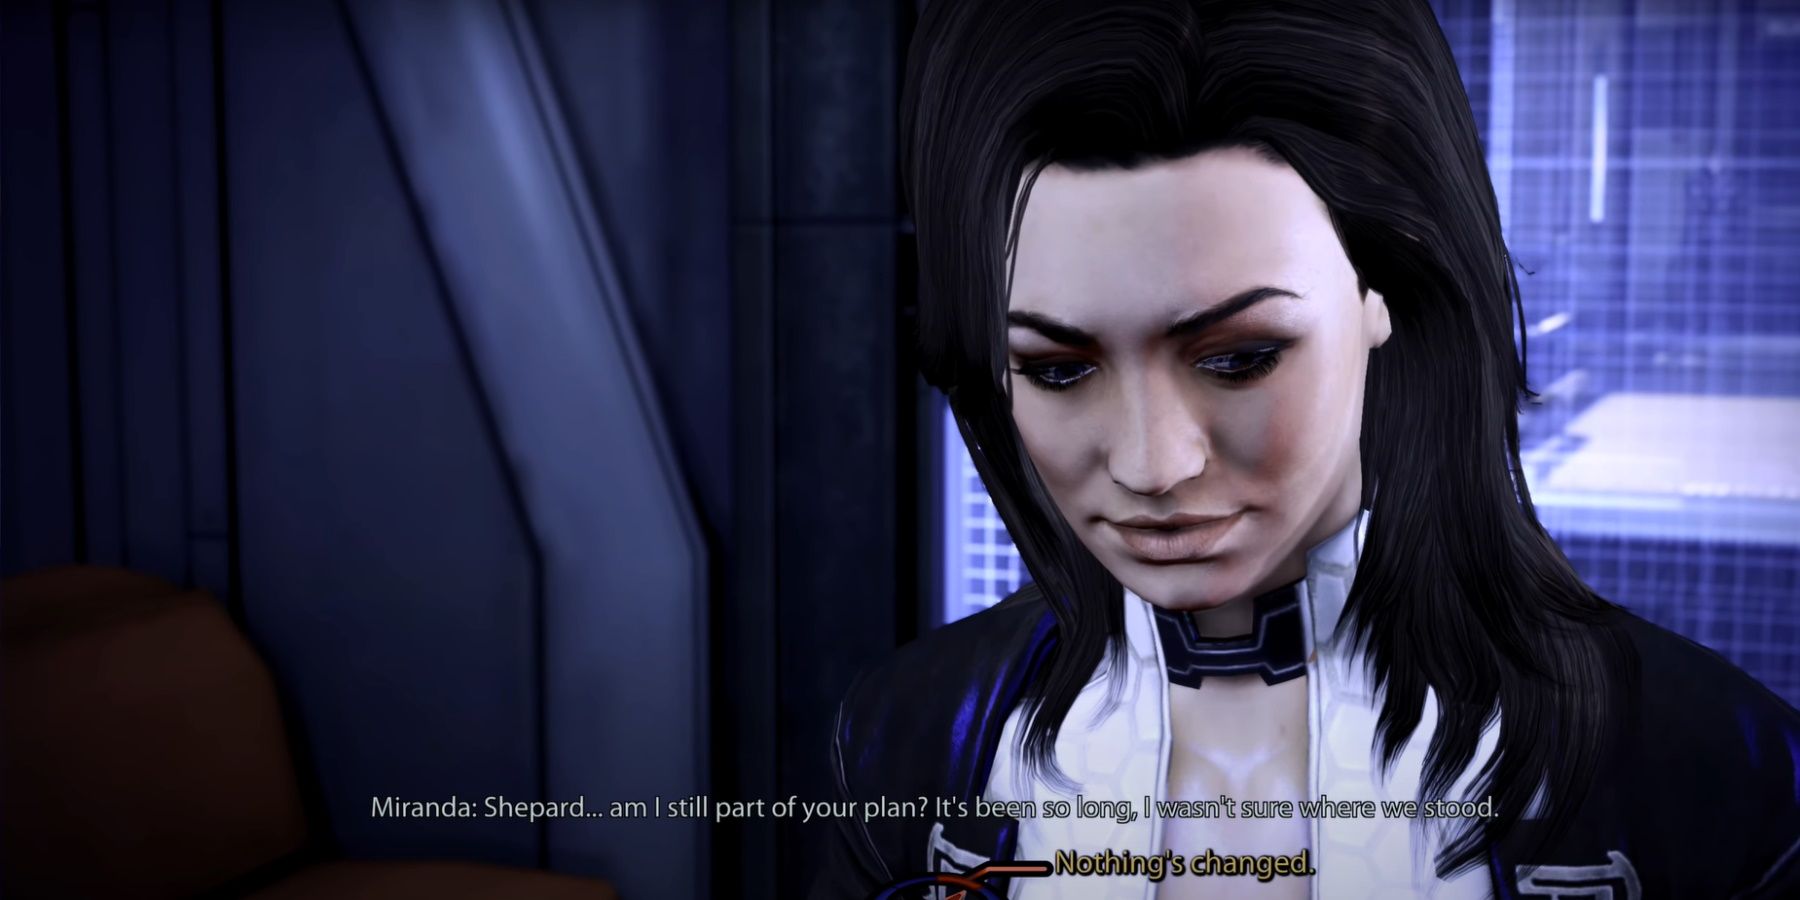 Male Shepard speaking with Miranda on the Citadel in Mass Effect 3